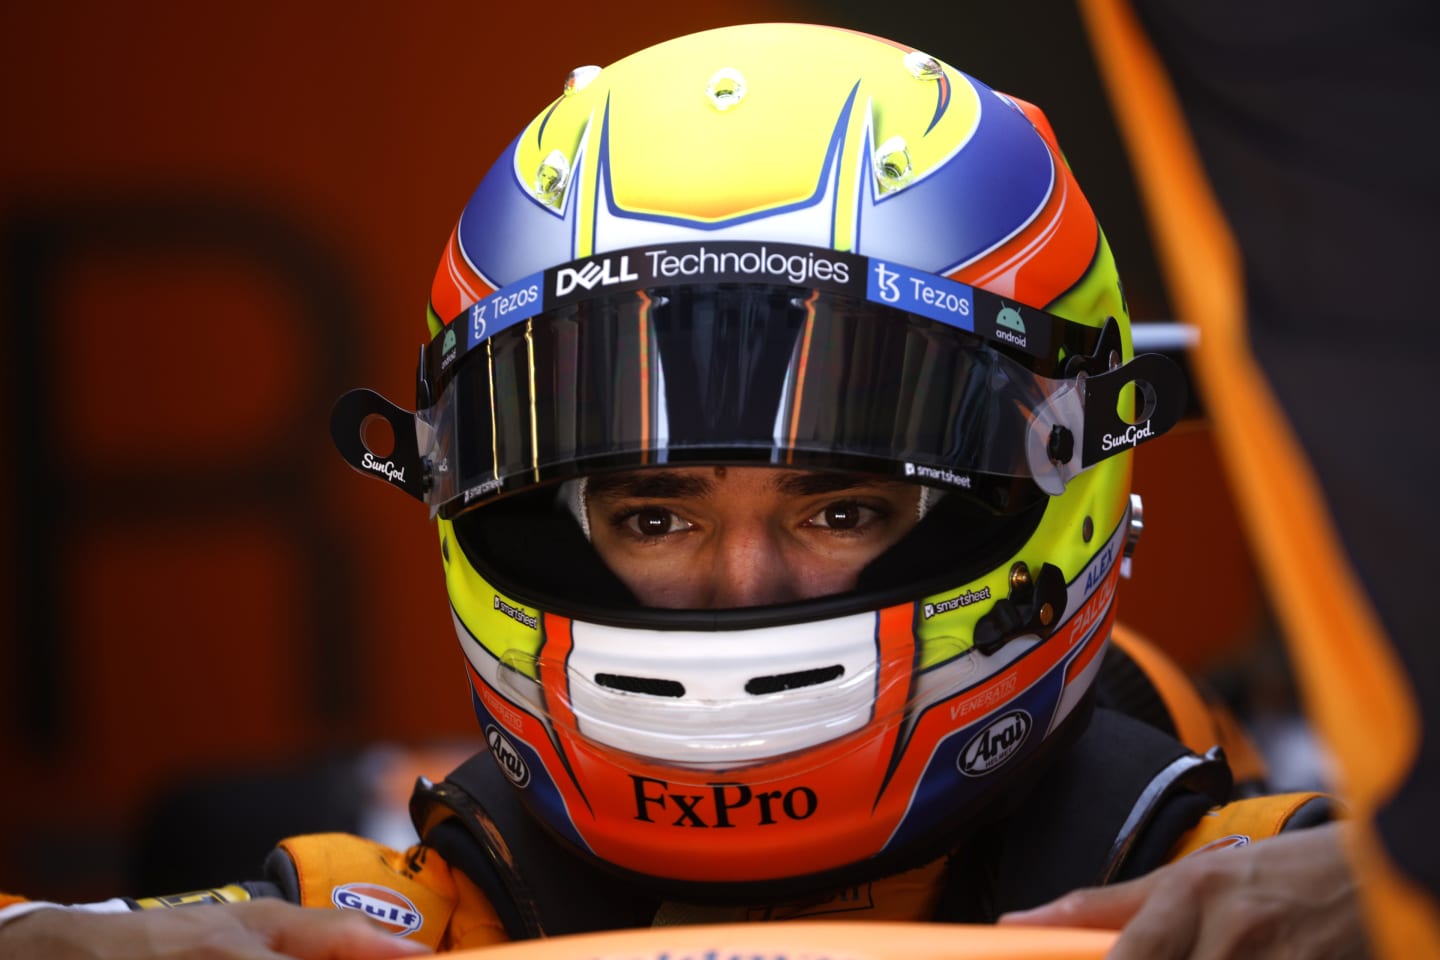 AUSTIN, TEXAS - OCTOBER 21: Alex Palou of Spain and McLaren prepares to drive in the garage during practice ahead of the F1 Grand Prix of USA at Circuit of The Americas on October 21, 2022 in Austin, Texas. (Photo by Chris Graythen/Getty Images)